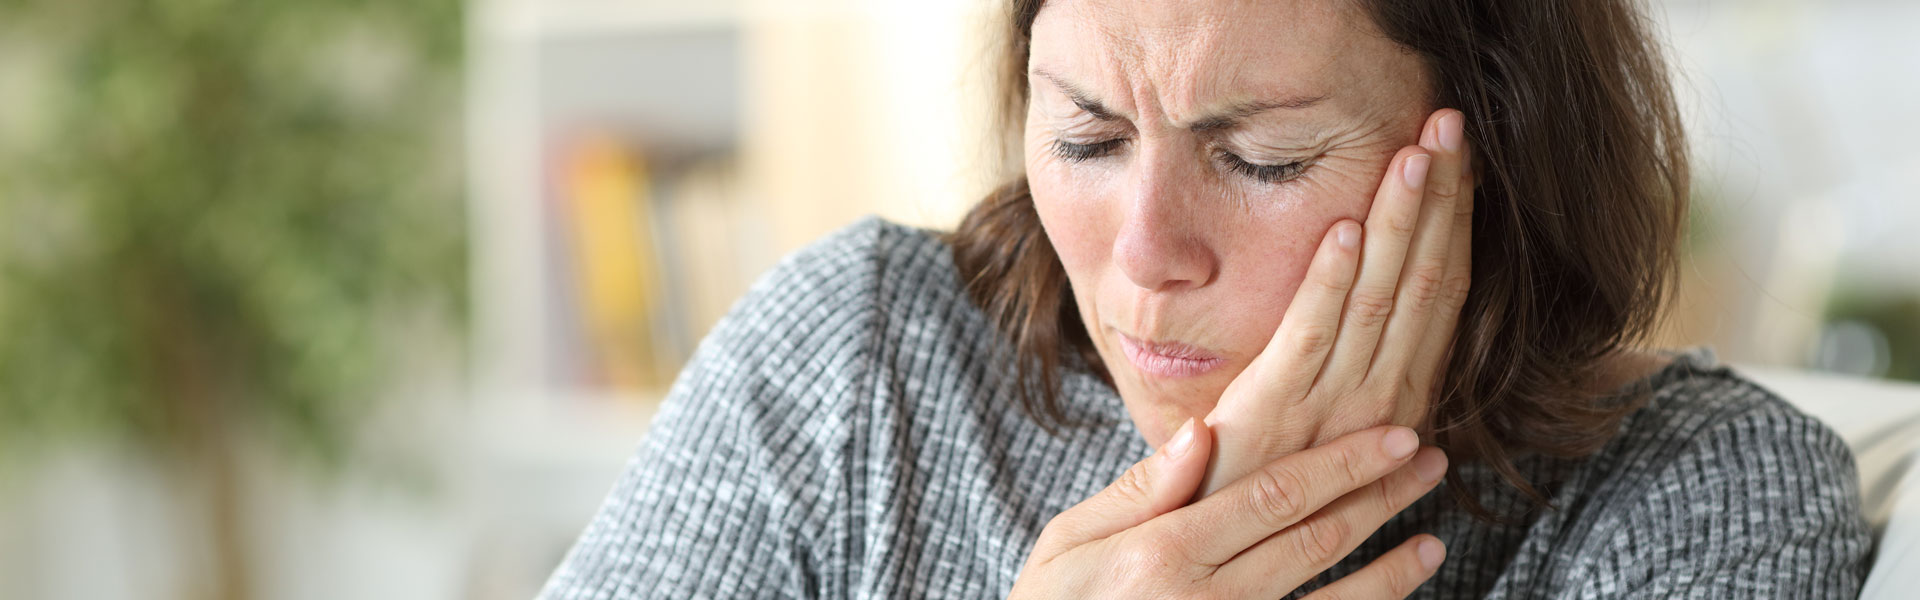 Middle age woman in pain suffering from toothache